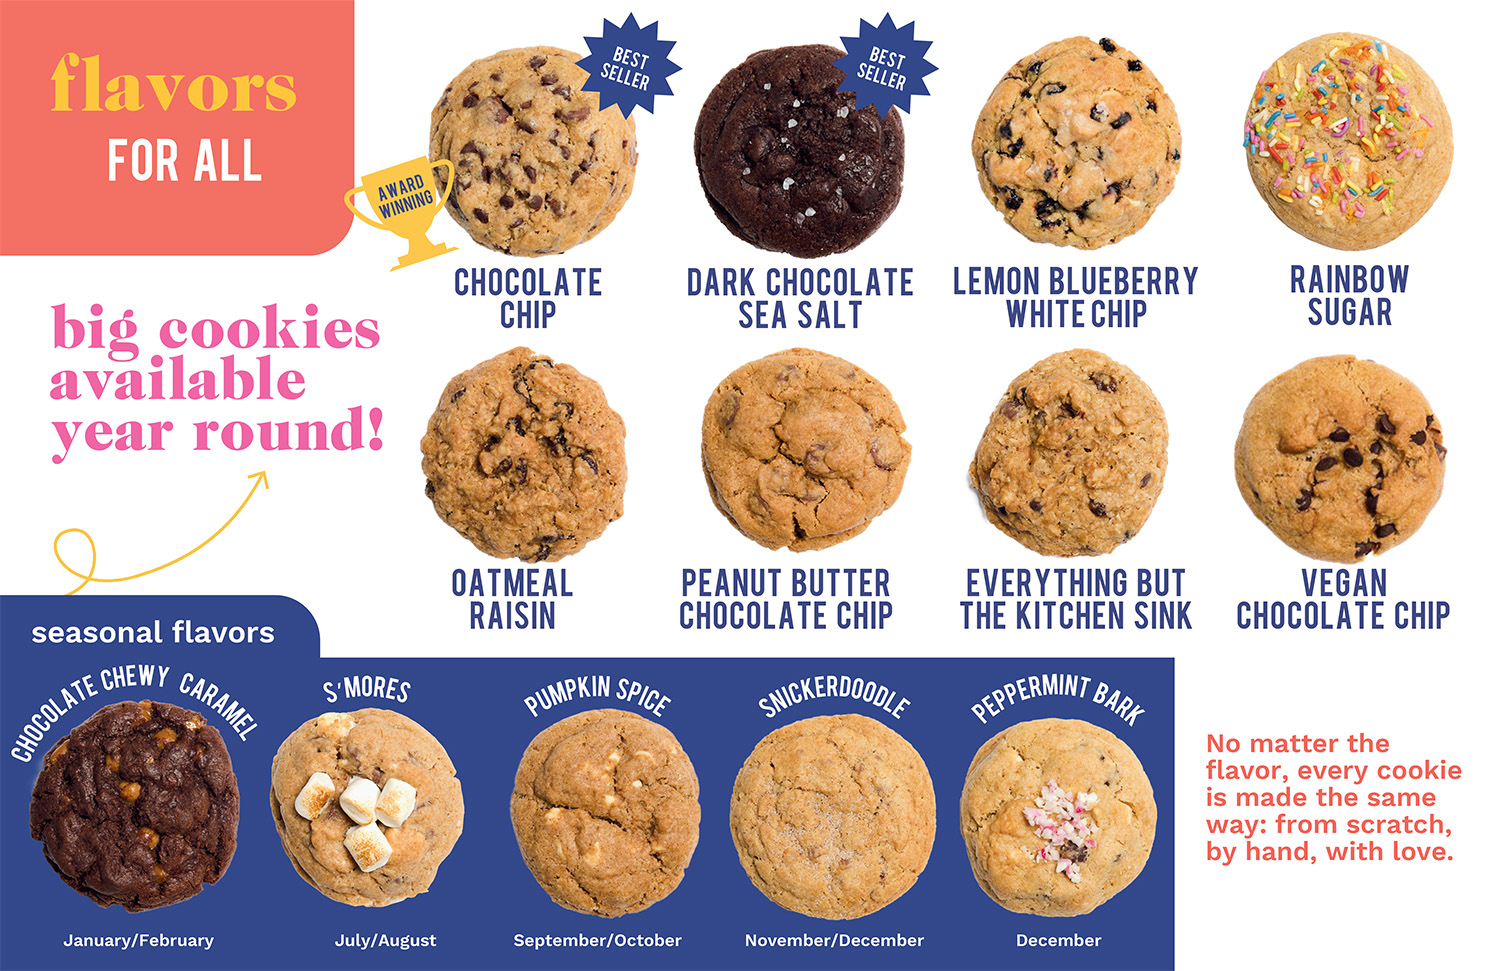 corporate cookie gift flavor options